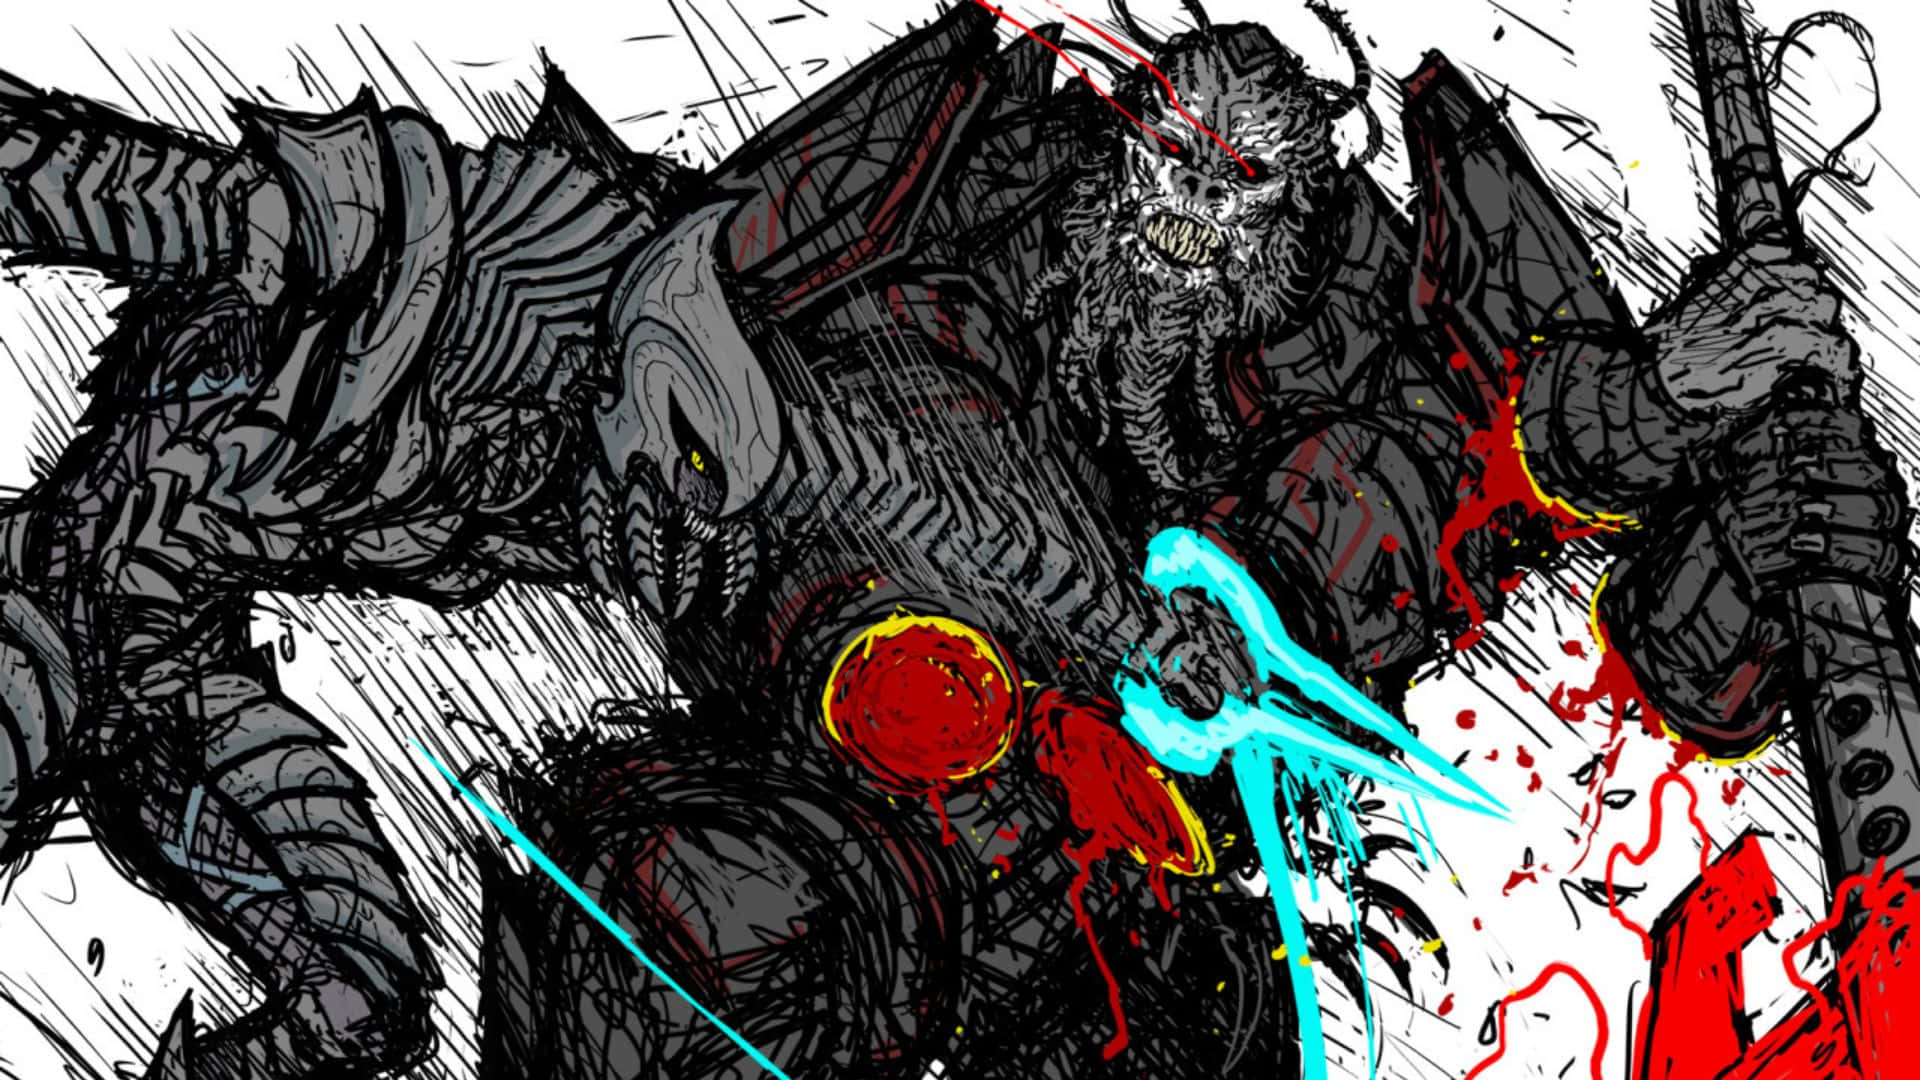 Atriox, the Mighty Jiralhanae Leader Wallpaper